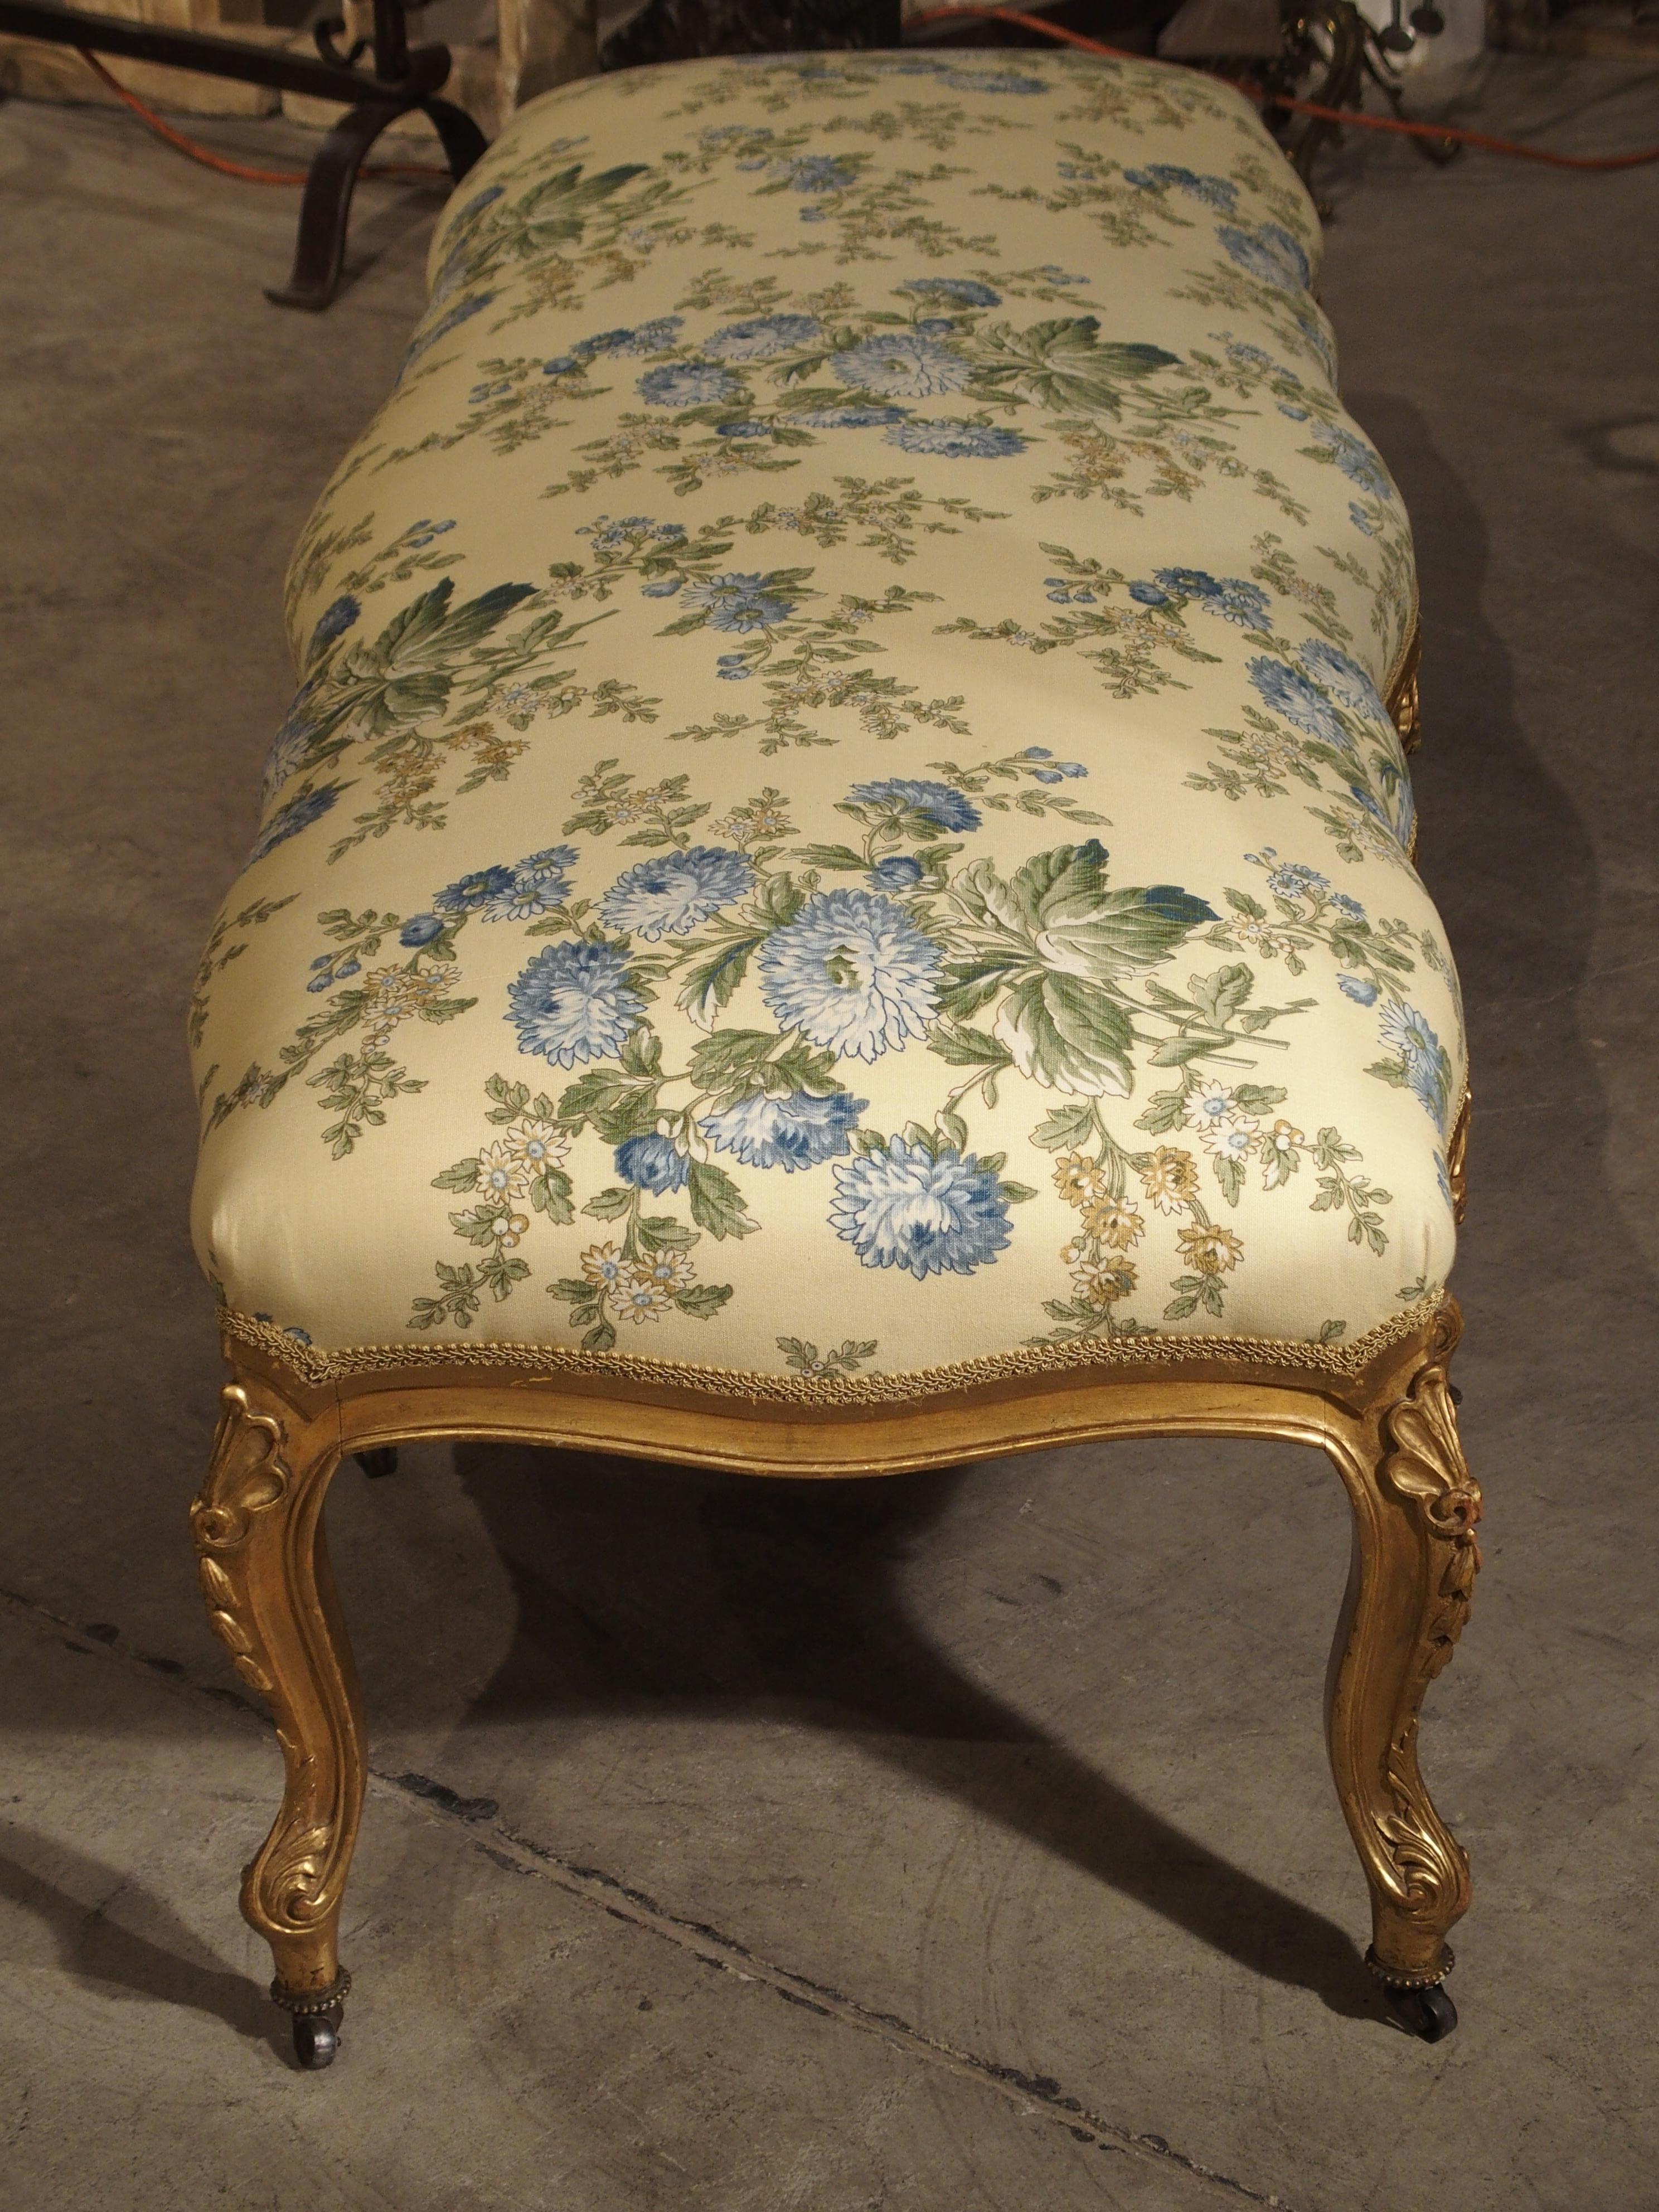 Fabric Antique Giltwood Regence Style Banquette from France, 19th Century